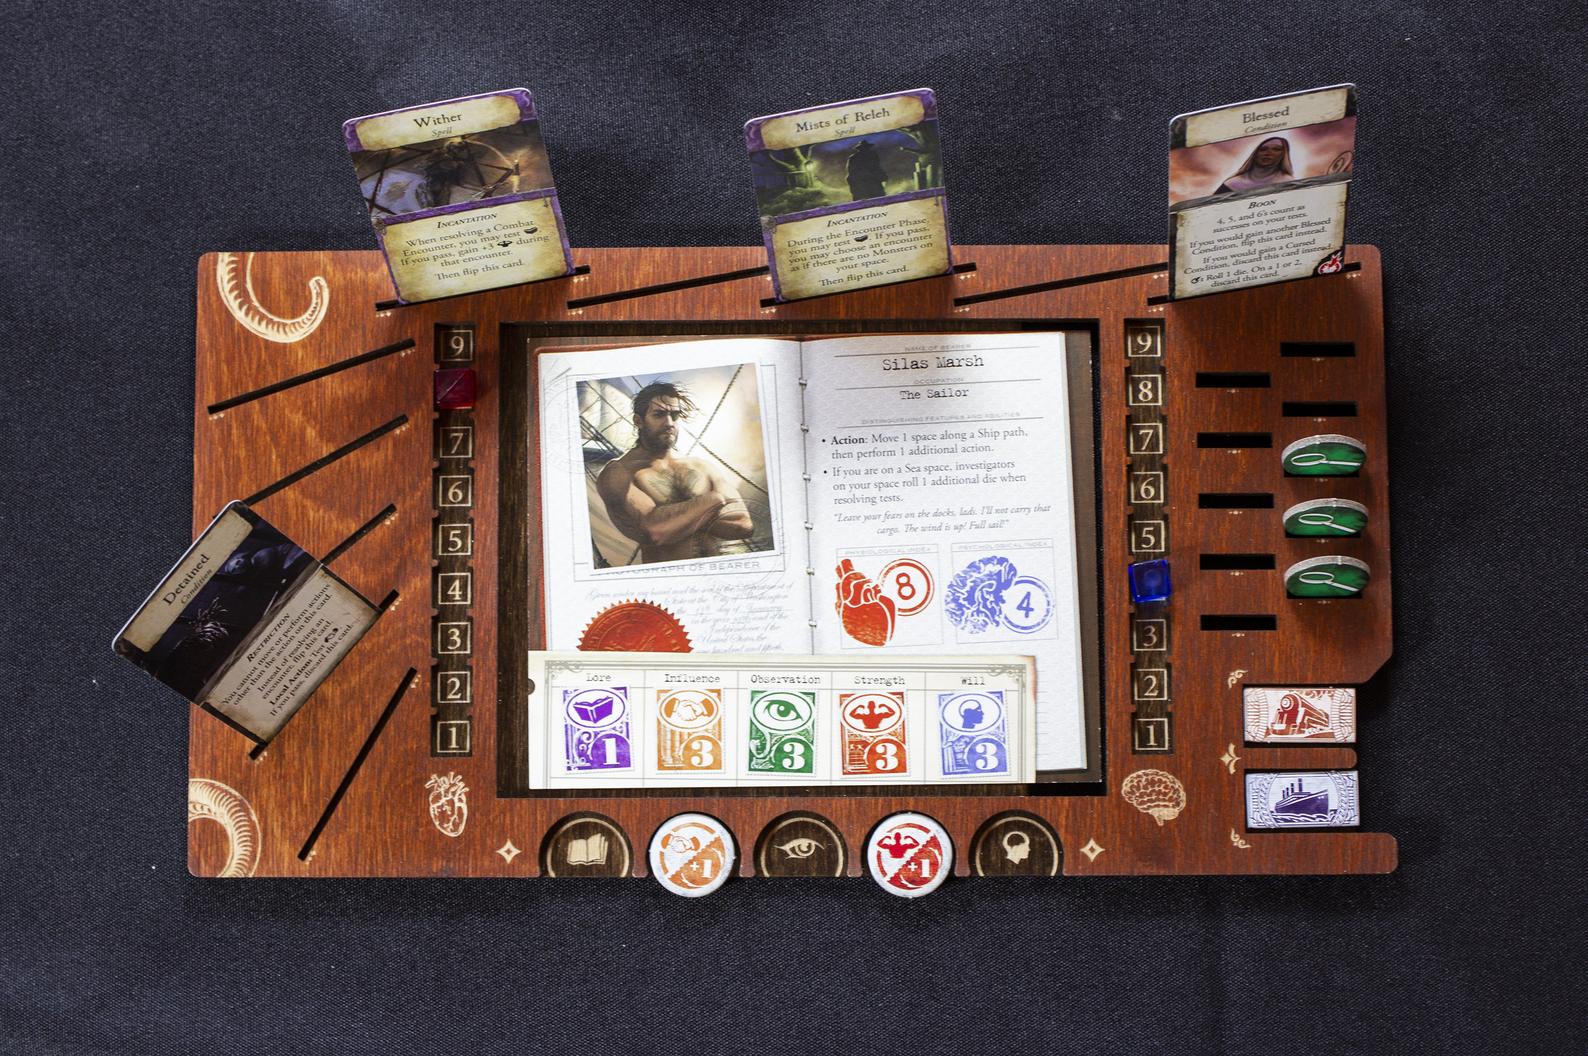 Board game player's quality mantra drives him to create a winning gameplay accessory business